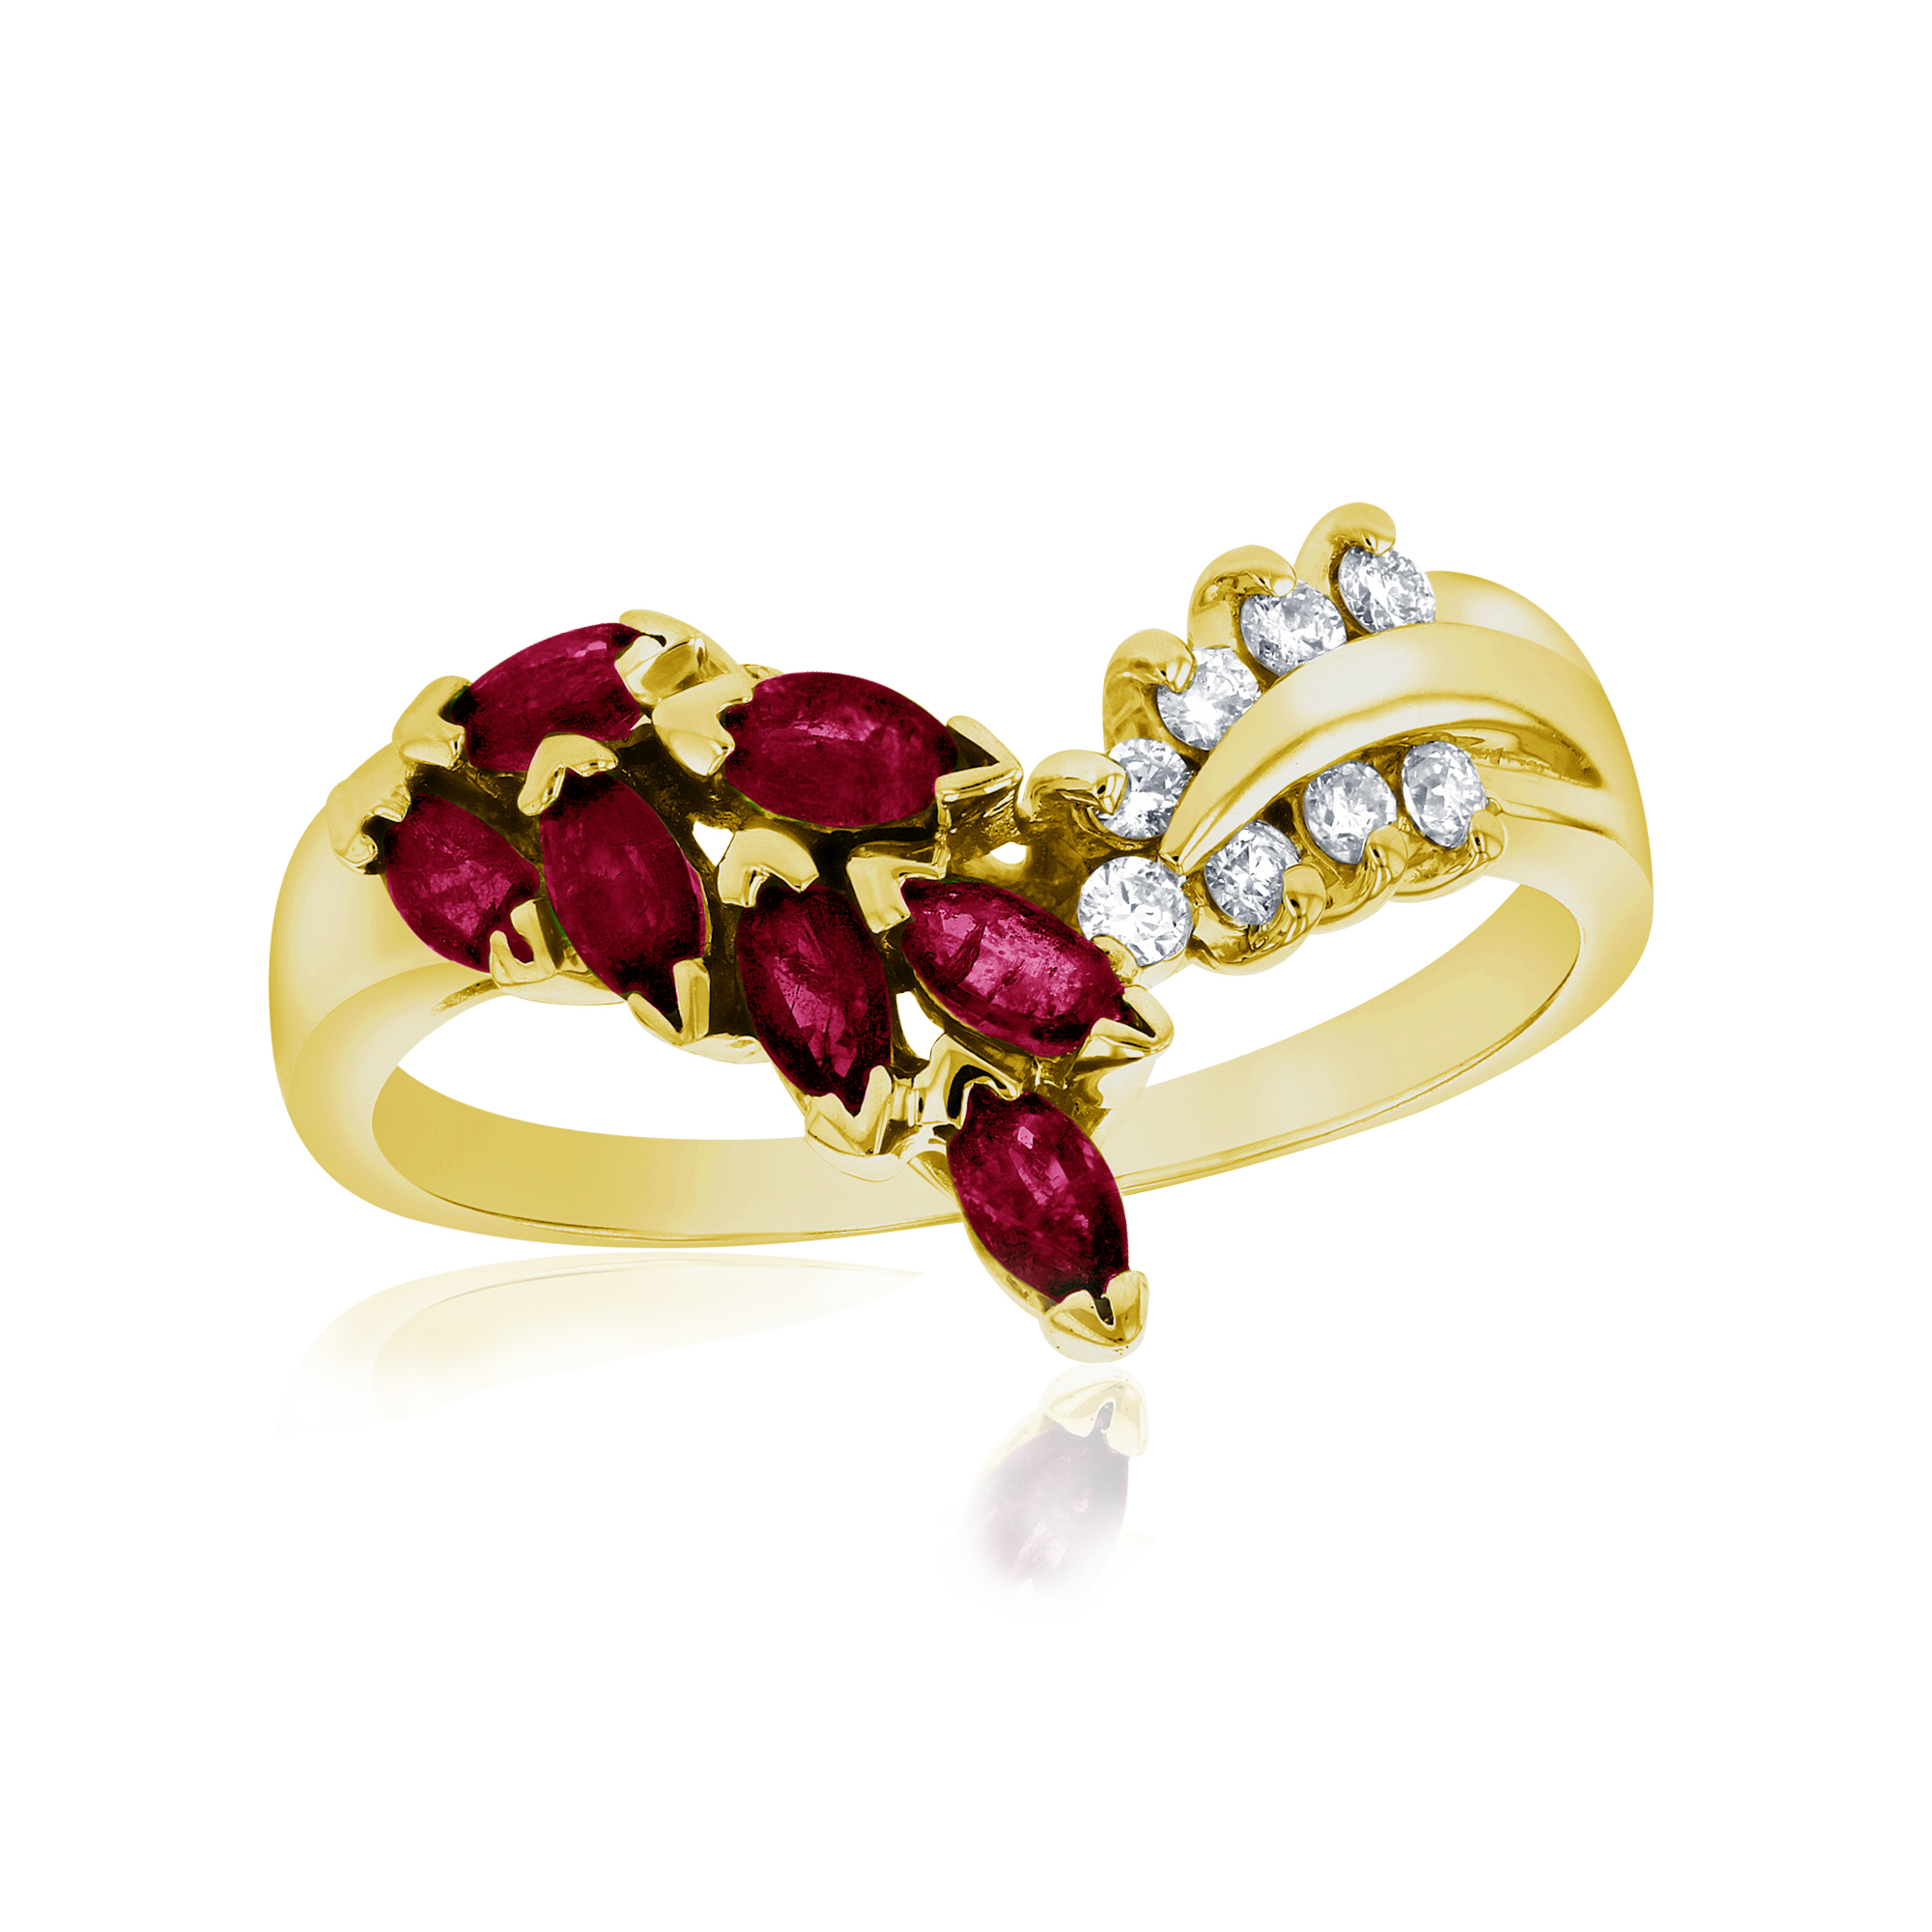 View 0.59ctw Diamonds and Ruby Fashion Ring in 14k Yellow Gold